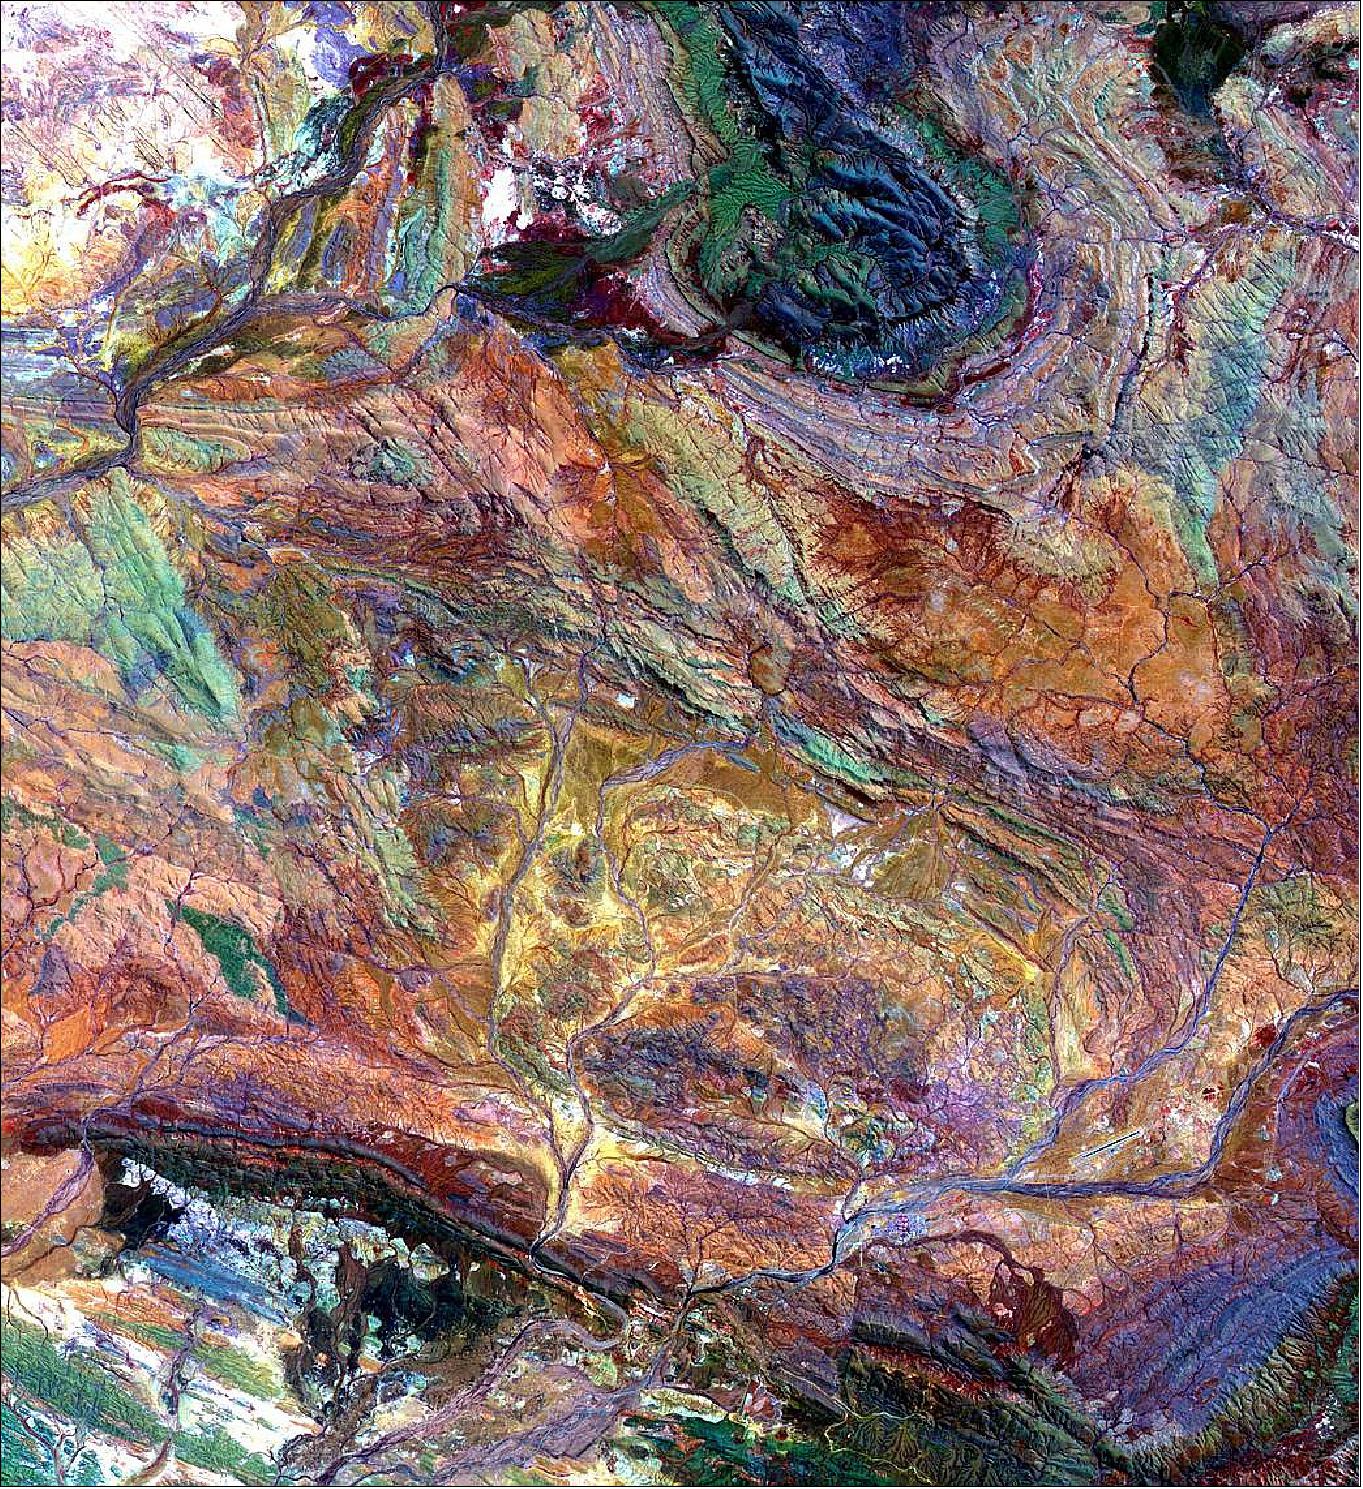 Figure 26: The broad spectral coverage and high spectral resolution of ASTER provides scientists in numerous disciplines with critical information for surface mapping and monitoring of dynamic conditions and temporal change. Example applications are monitoring glacial advances and retreats; monitoring potentially active volcanoes; identifying crop stress; determining cloud morphology and physical properties; wetlands evaluation; thermal pollution monitoring; coral reef degradation; surface temperature mapping of soils and geology; and measuring surface heat balance (image credit: NASA/METI/AIST/Japan Space Systems, and U.S./Japan ASTER Science Team)